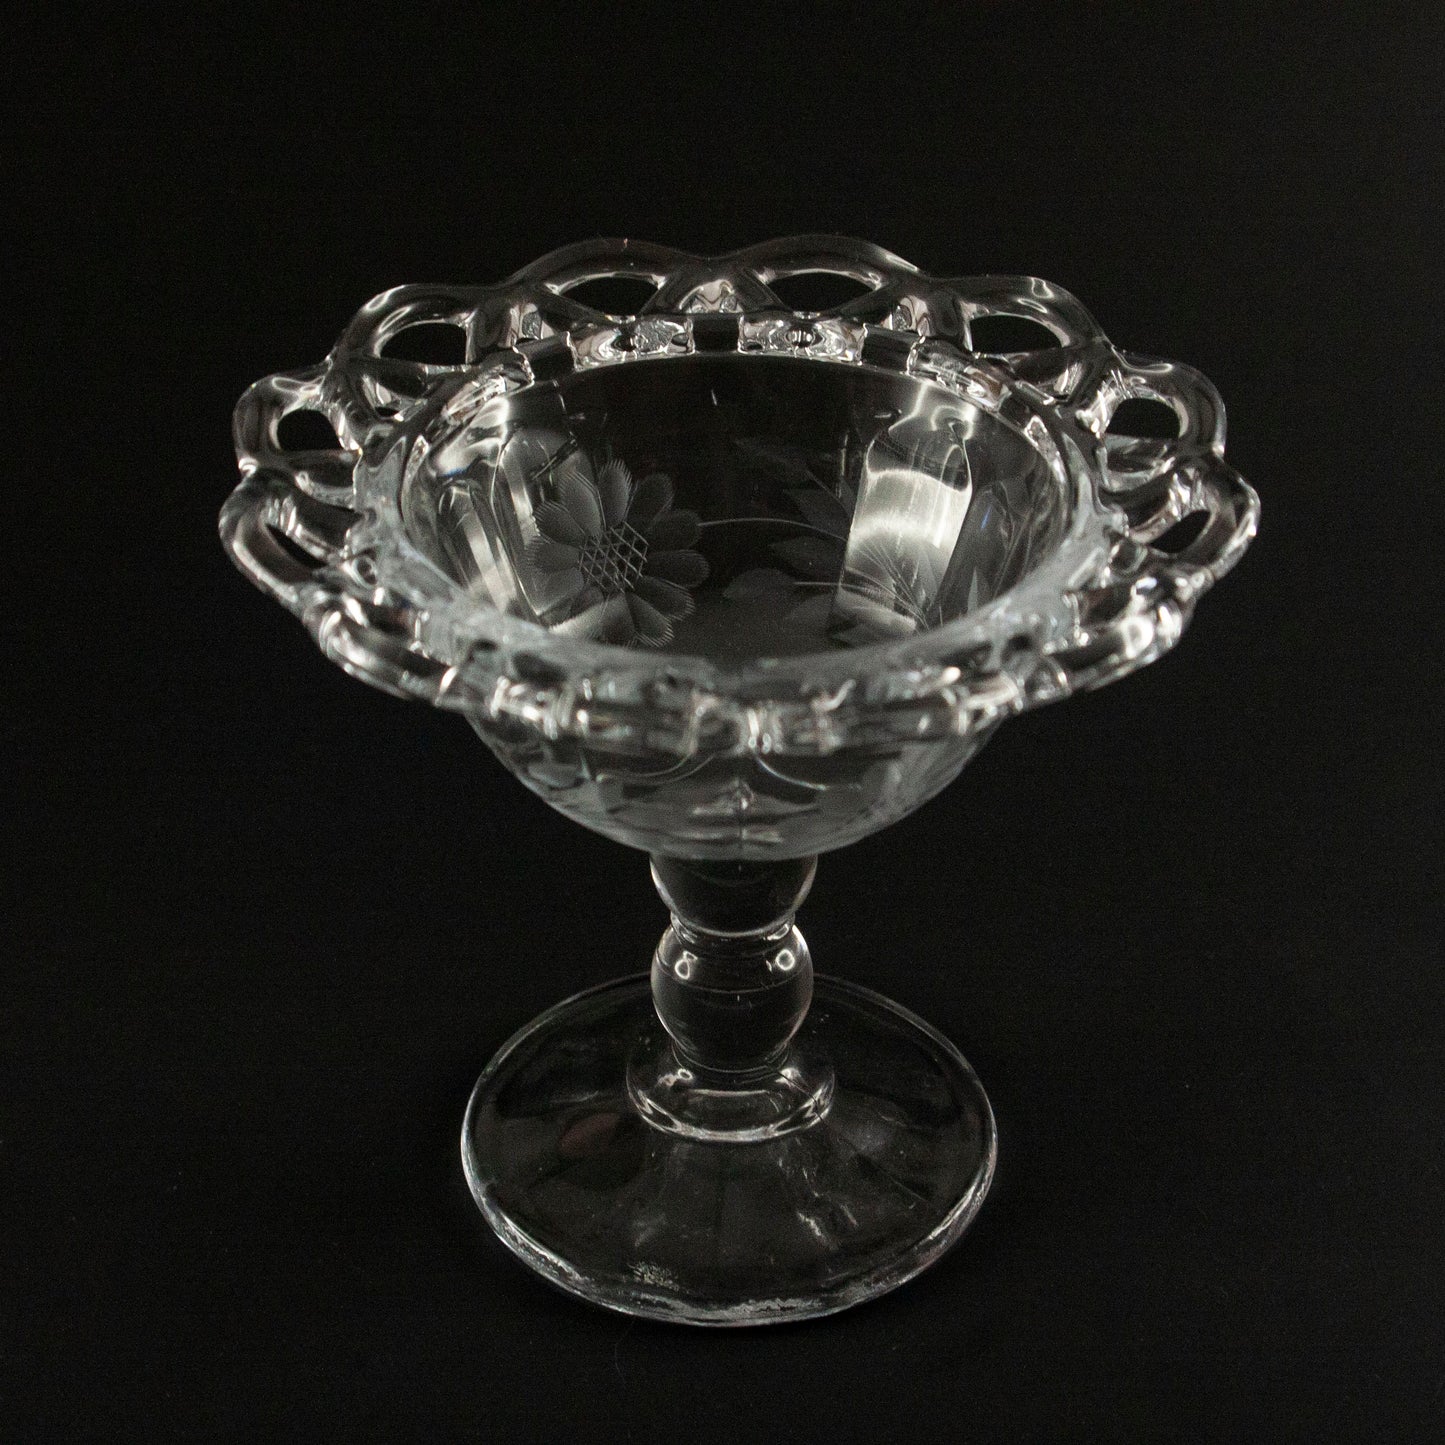 Footed Dish with Etched Flowers